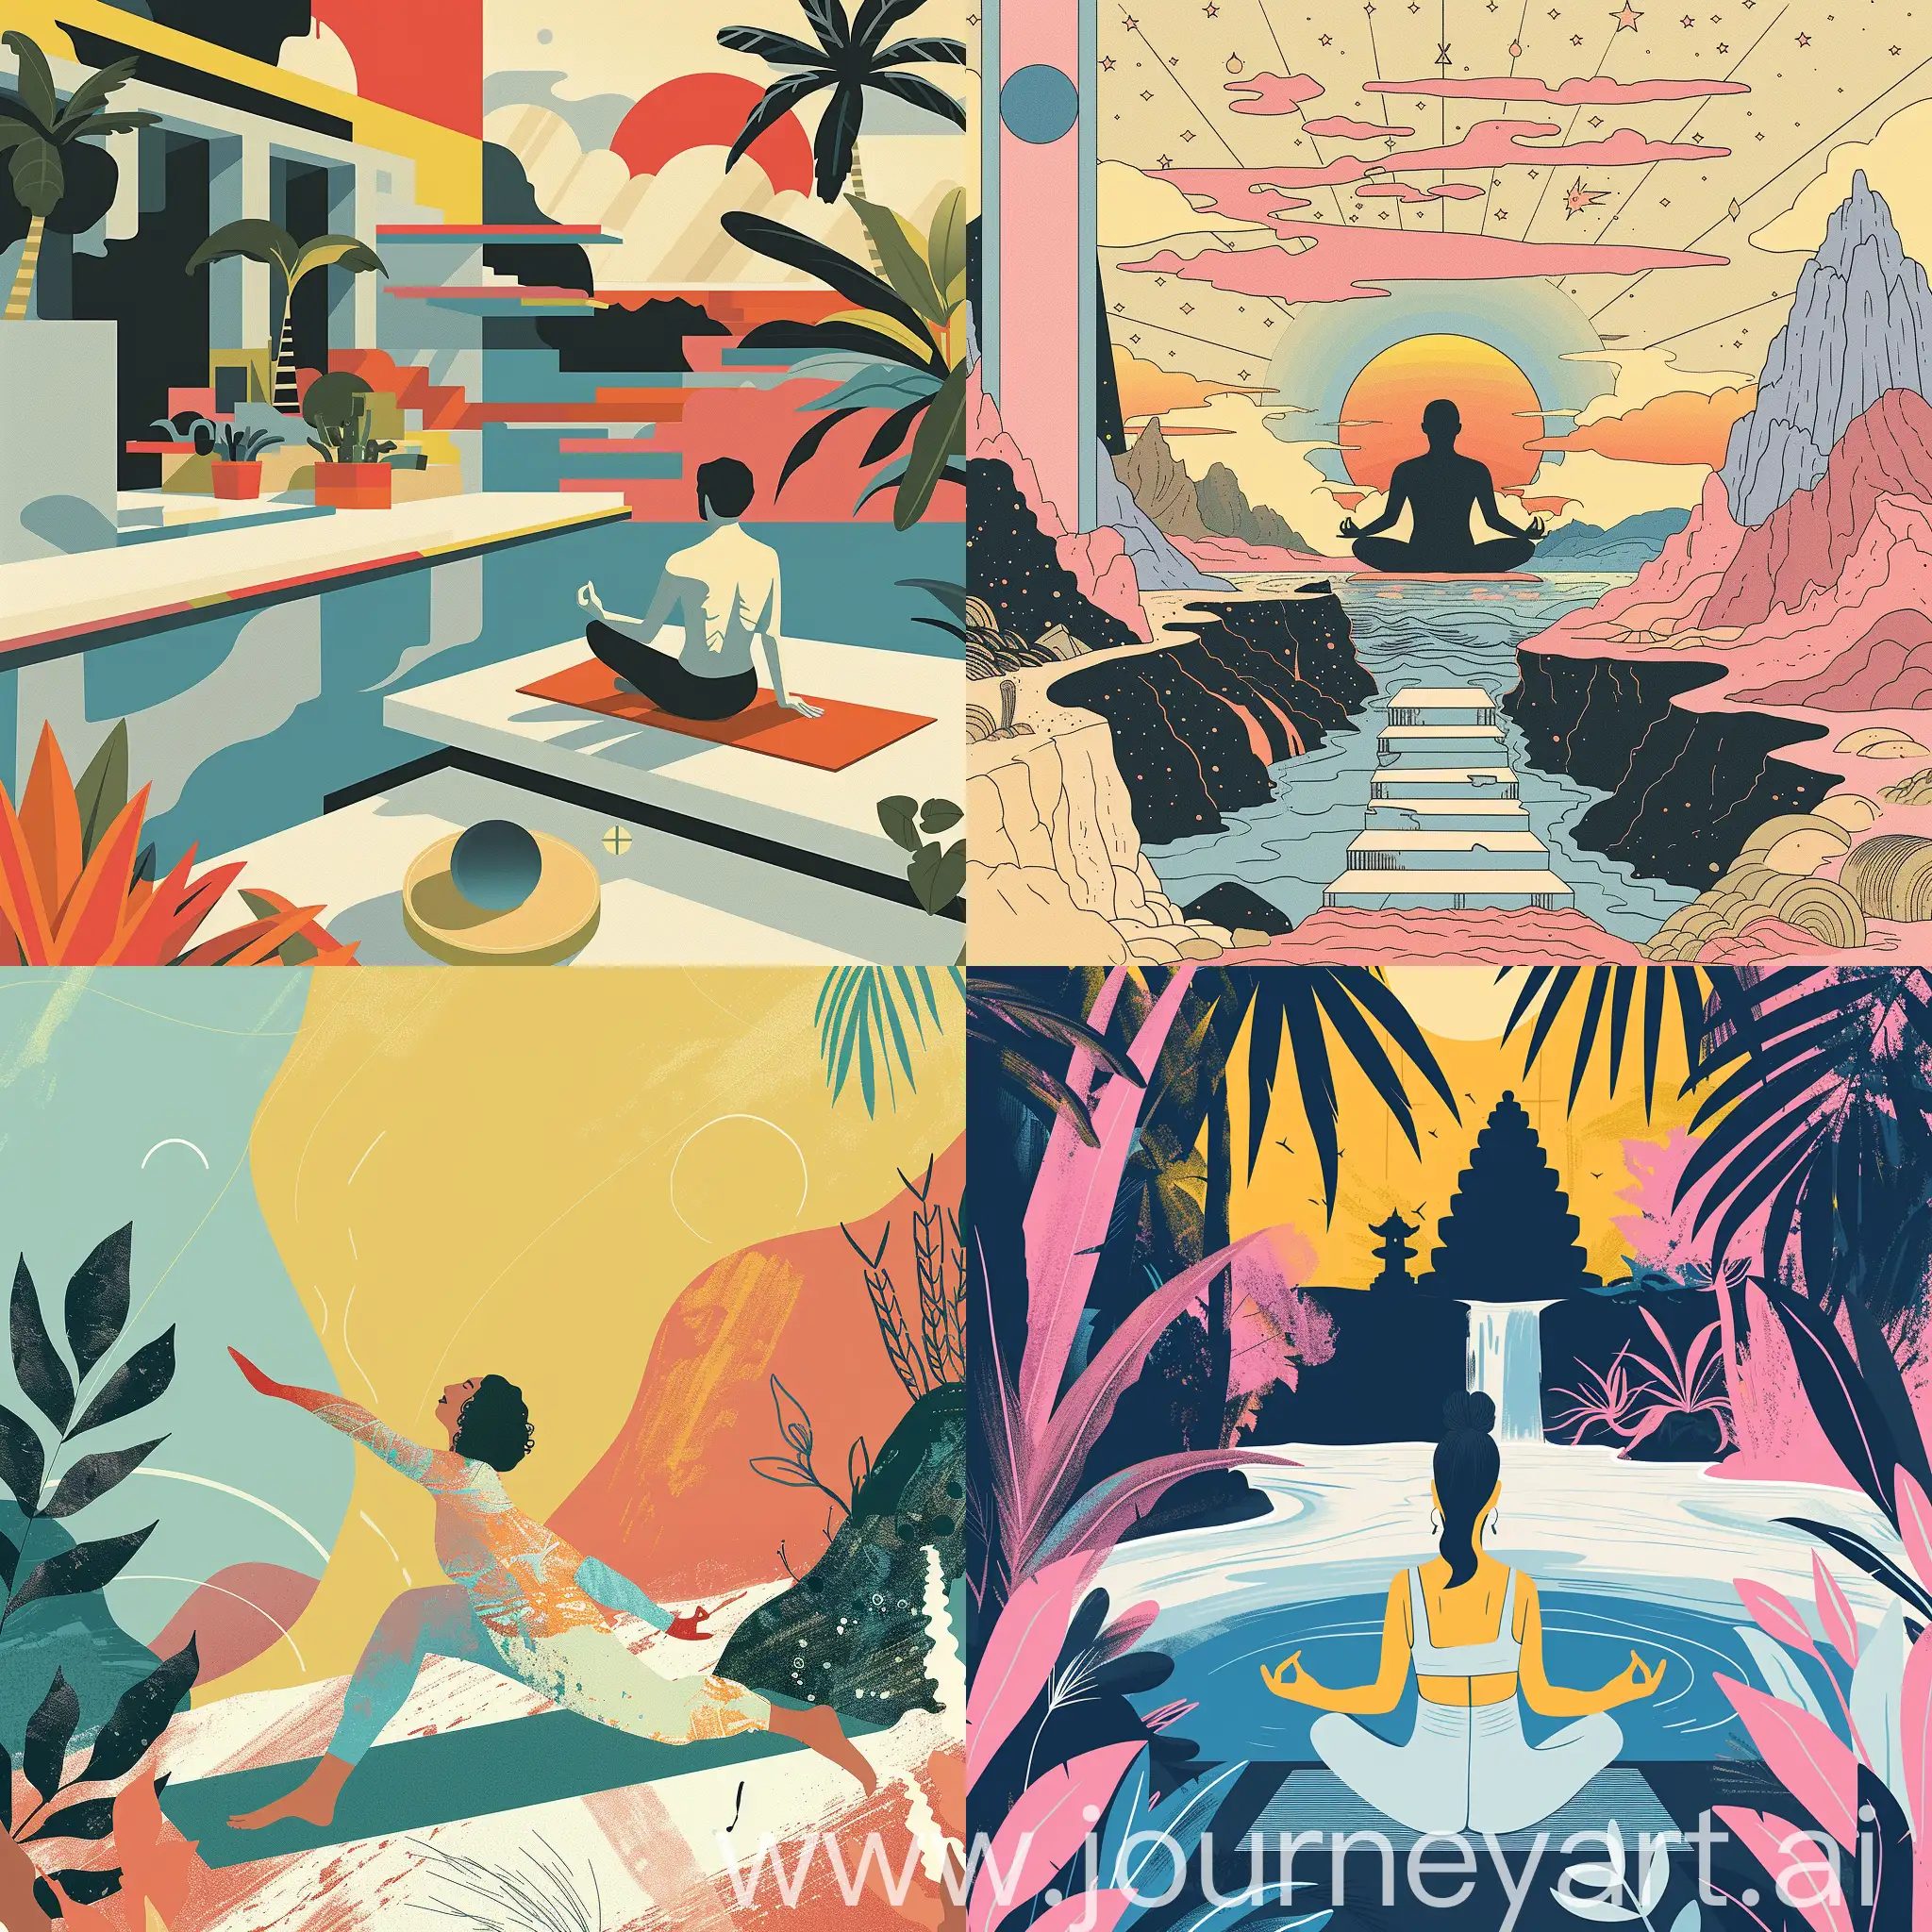 Create an illustration inspired by Richard McGuire design and Wes Anderson colors that convey in a cool, modern, and unexpected way, without any text in the visual, this prediction: Today's intensity is fueling your urge to change the world. Don't let it frustrate you - instead, dive into calming activities like yoga or swimming. They'll give you the peace and clarity to make a real difference, high quality details